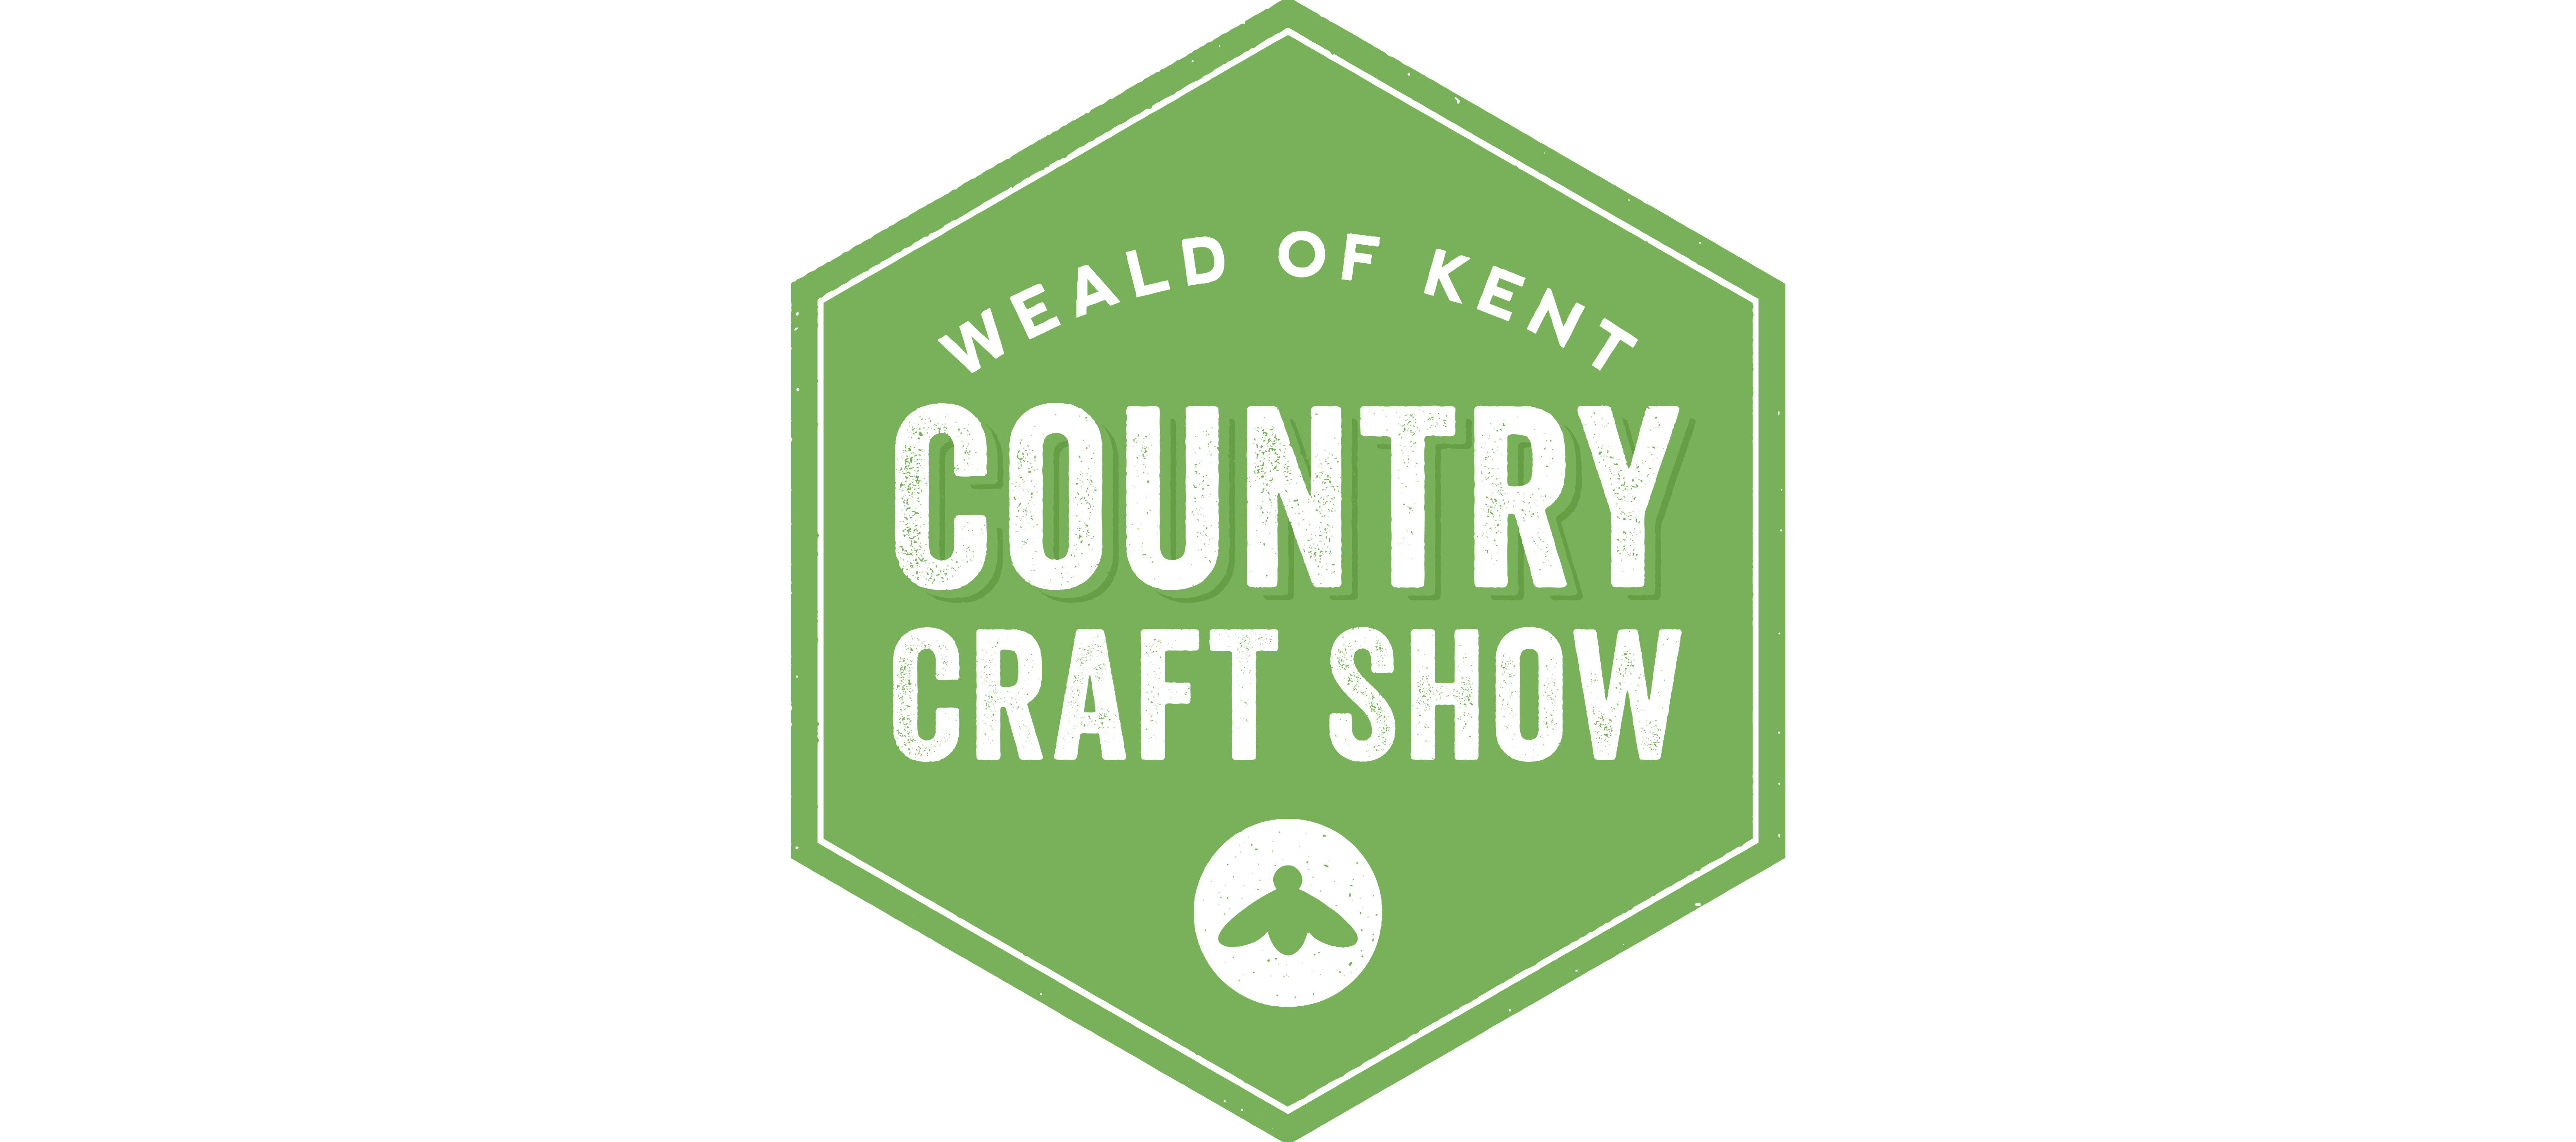 Weald Of Kent Country Craft Show